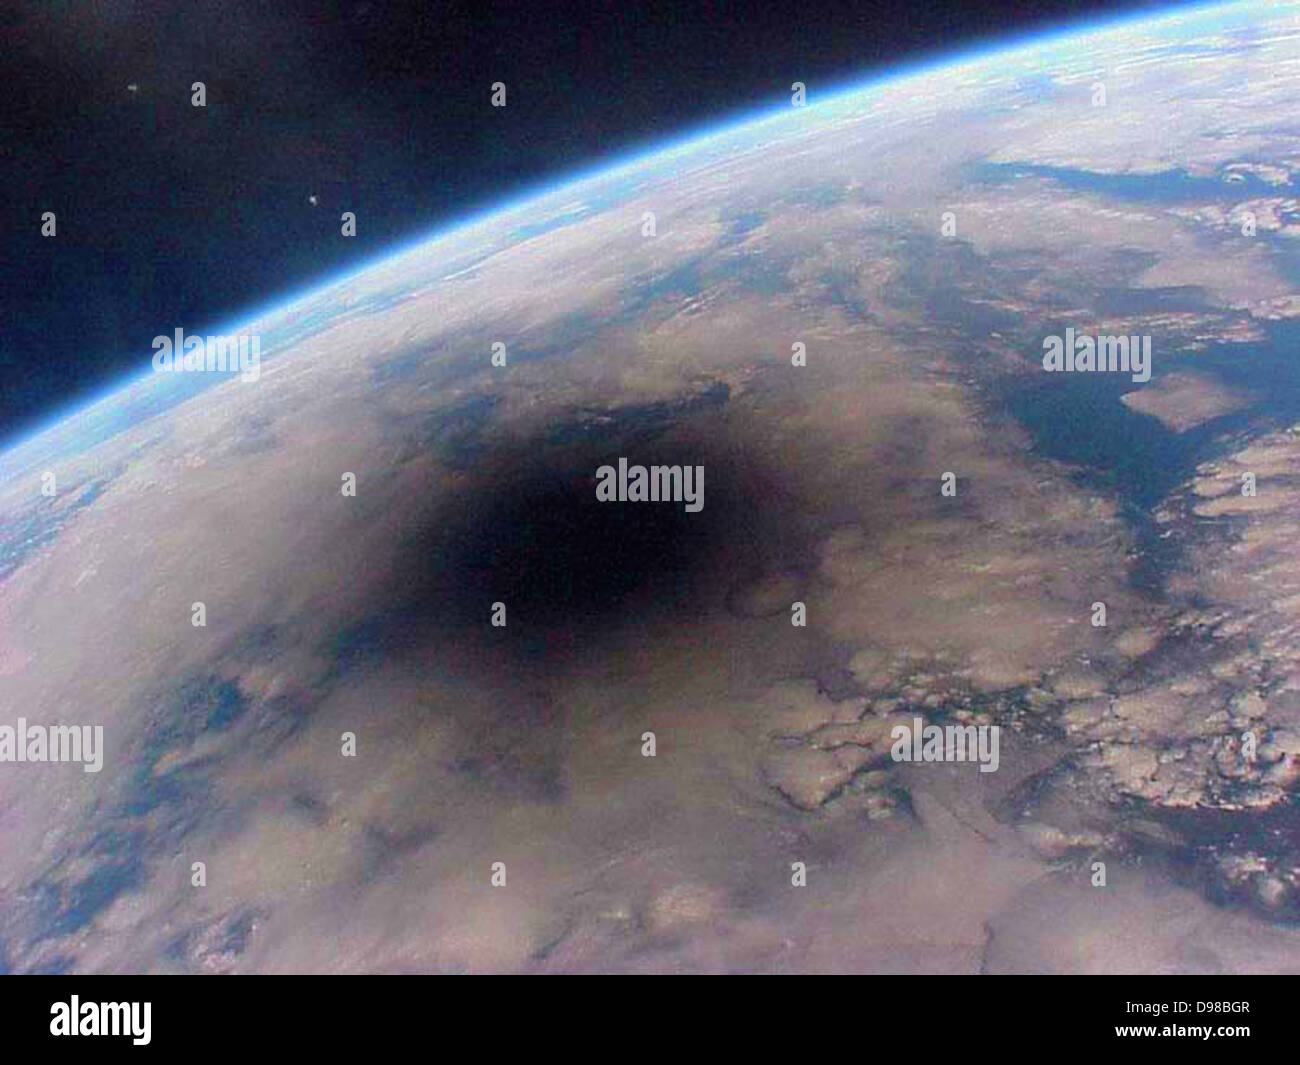 Here is what the Earth looks like during a solar eclipse. The shadow of the Moon can be seen darkening part of Earth. This Stock Photo